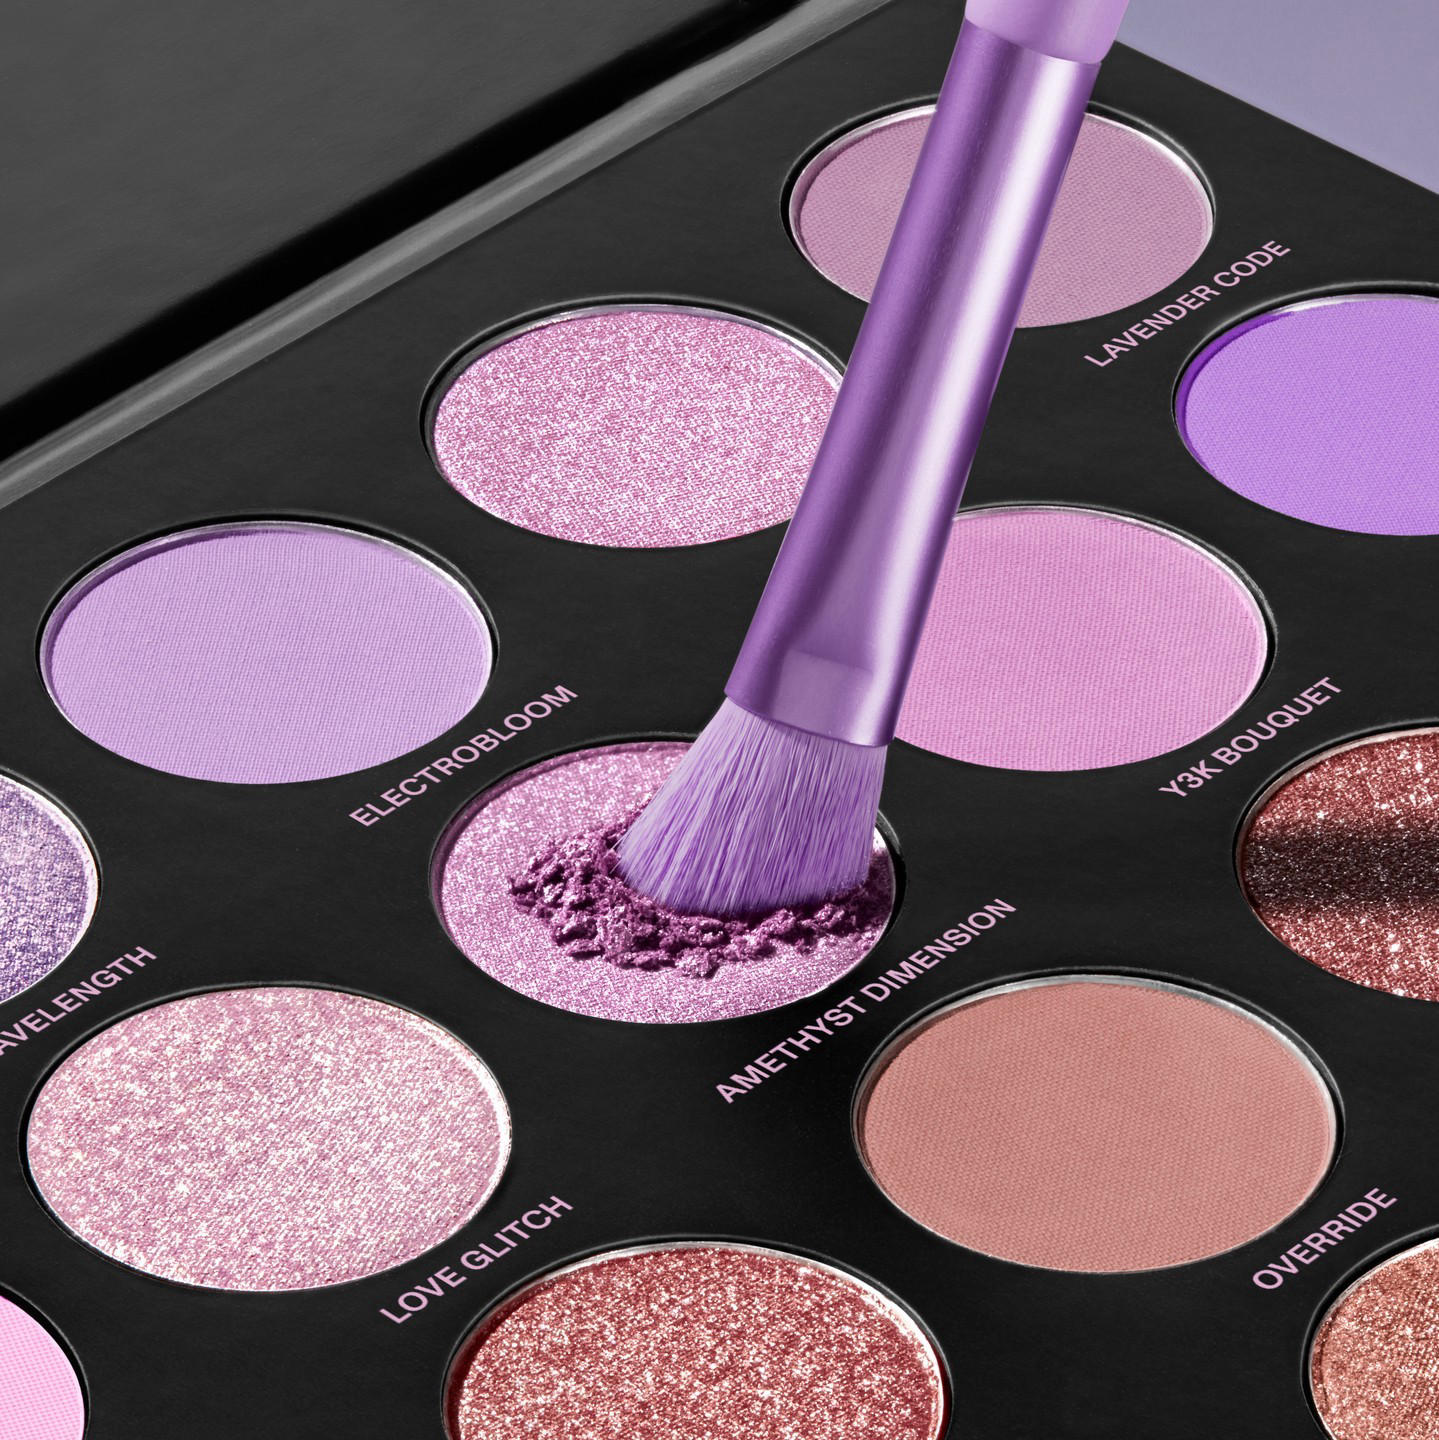 image  1 Morphe - Mesmerized by the shimmers in this 35L Ultralavender Artistry Palette ($27 USD)